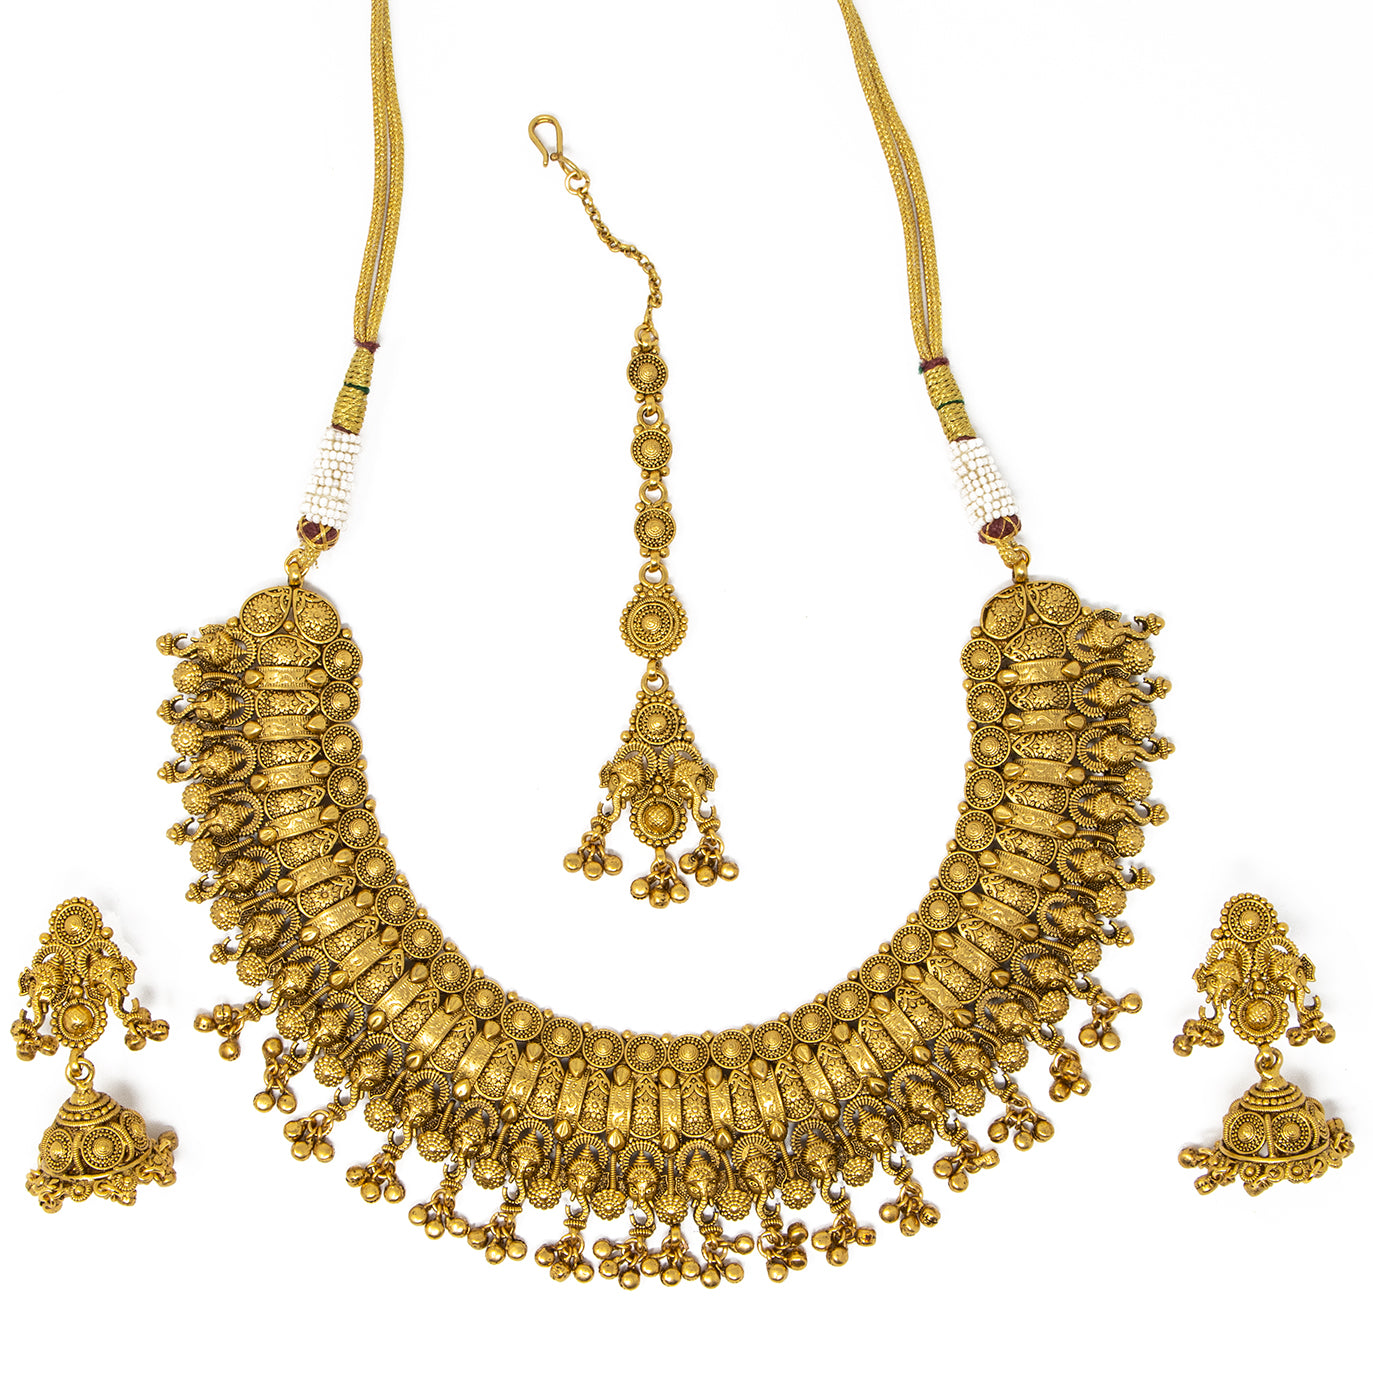 Gold 3 piece Necklace set with earrings and forehead piece